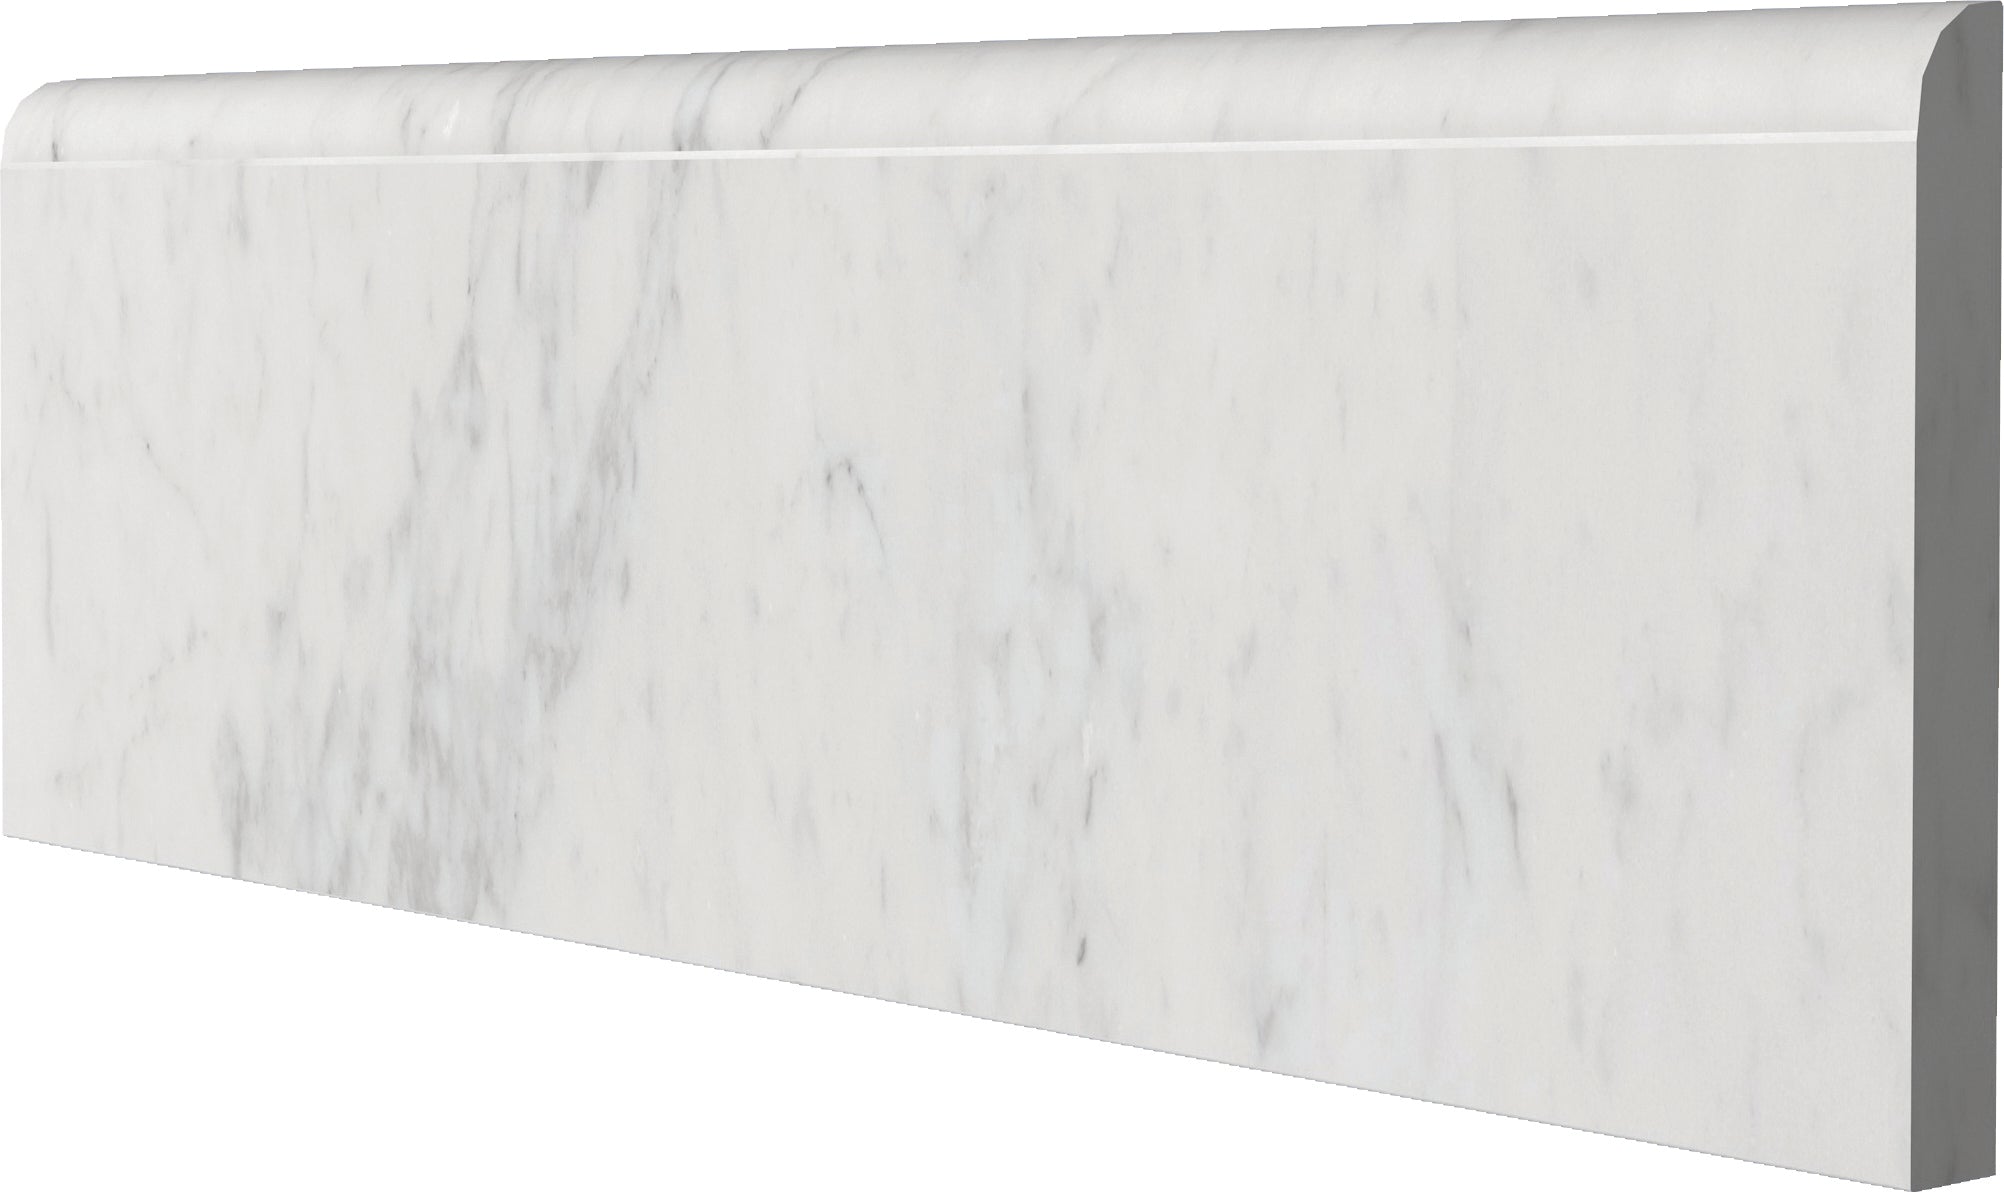 Bianco Gioia Marble 4x12 Bullnose Trim - Polished Or Honed  - DW TILE & STONE - Atlanta Marble Natural Stone Wholesale Stone Supplier